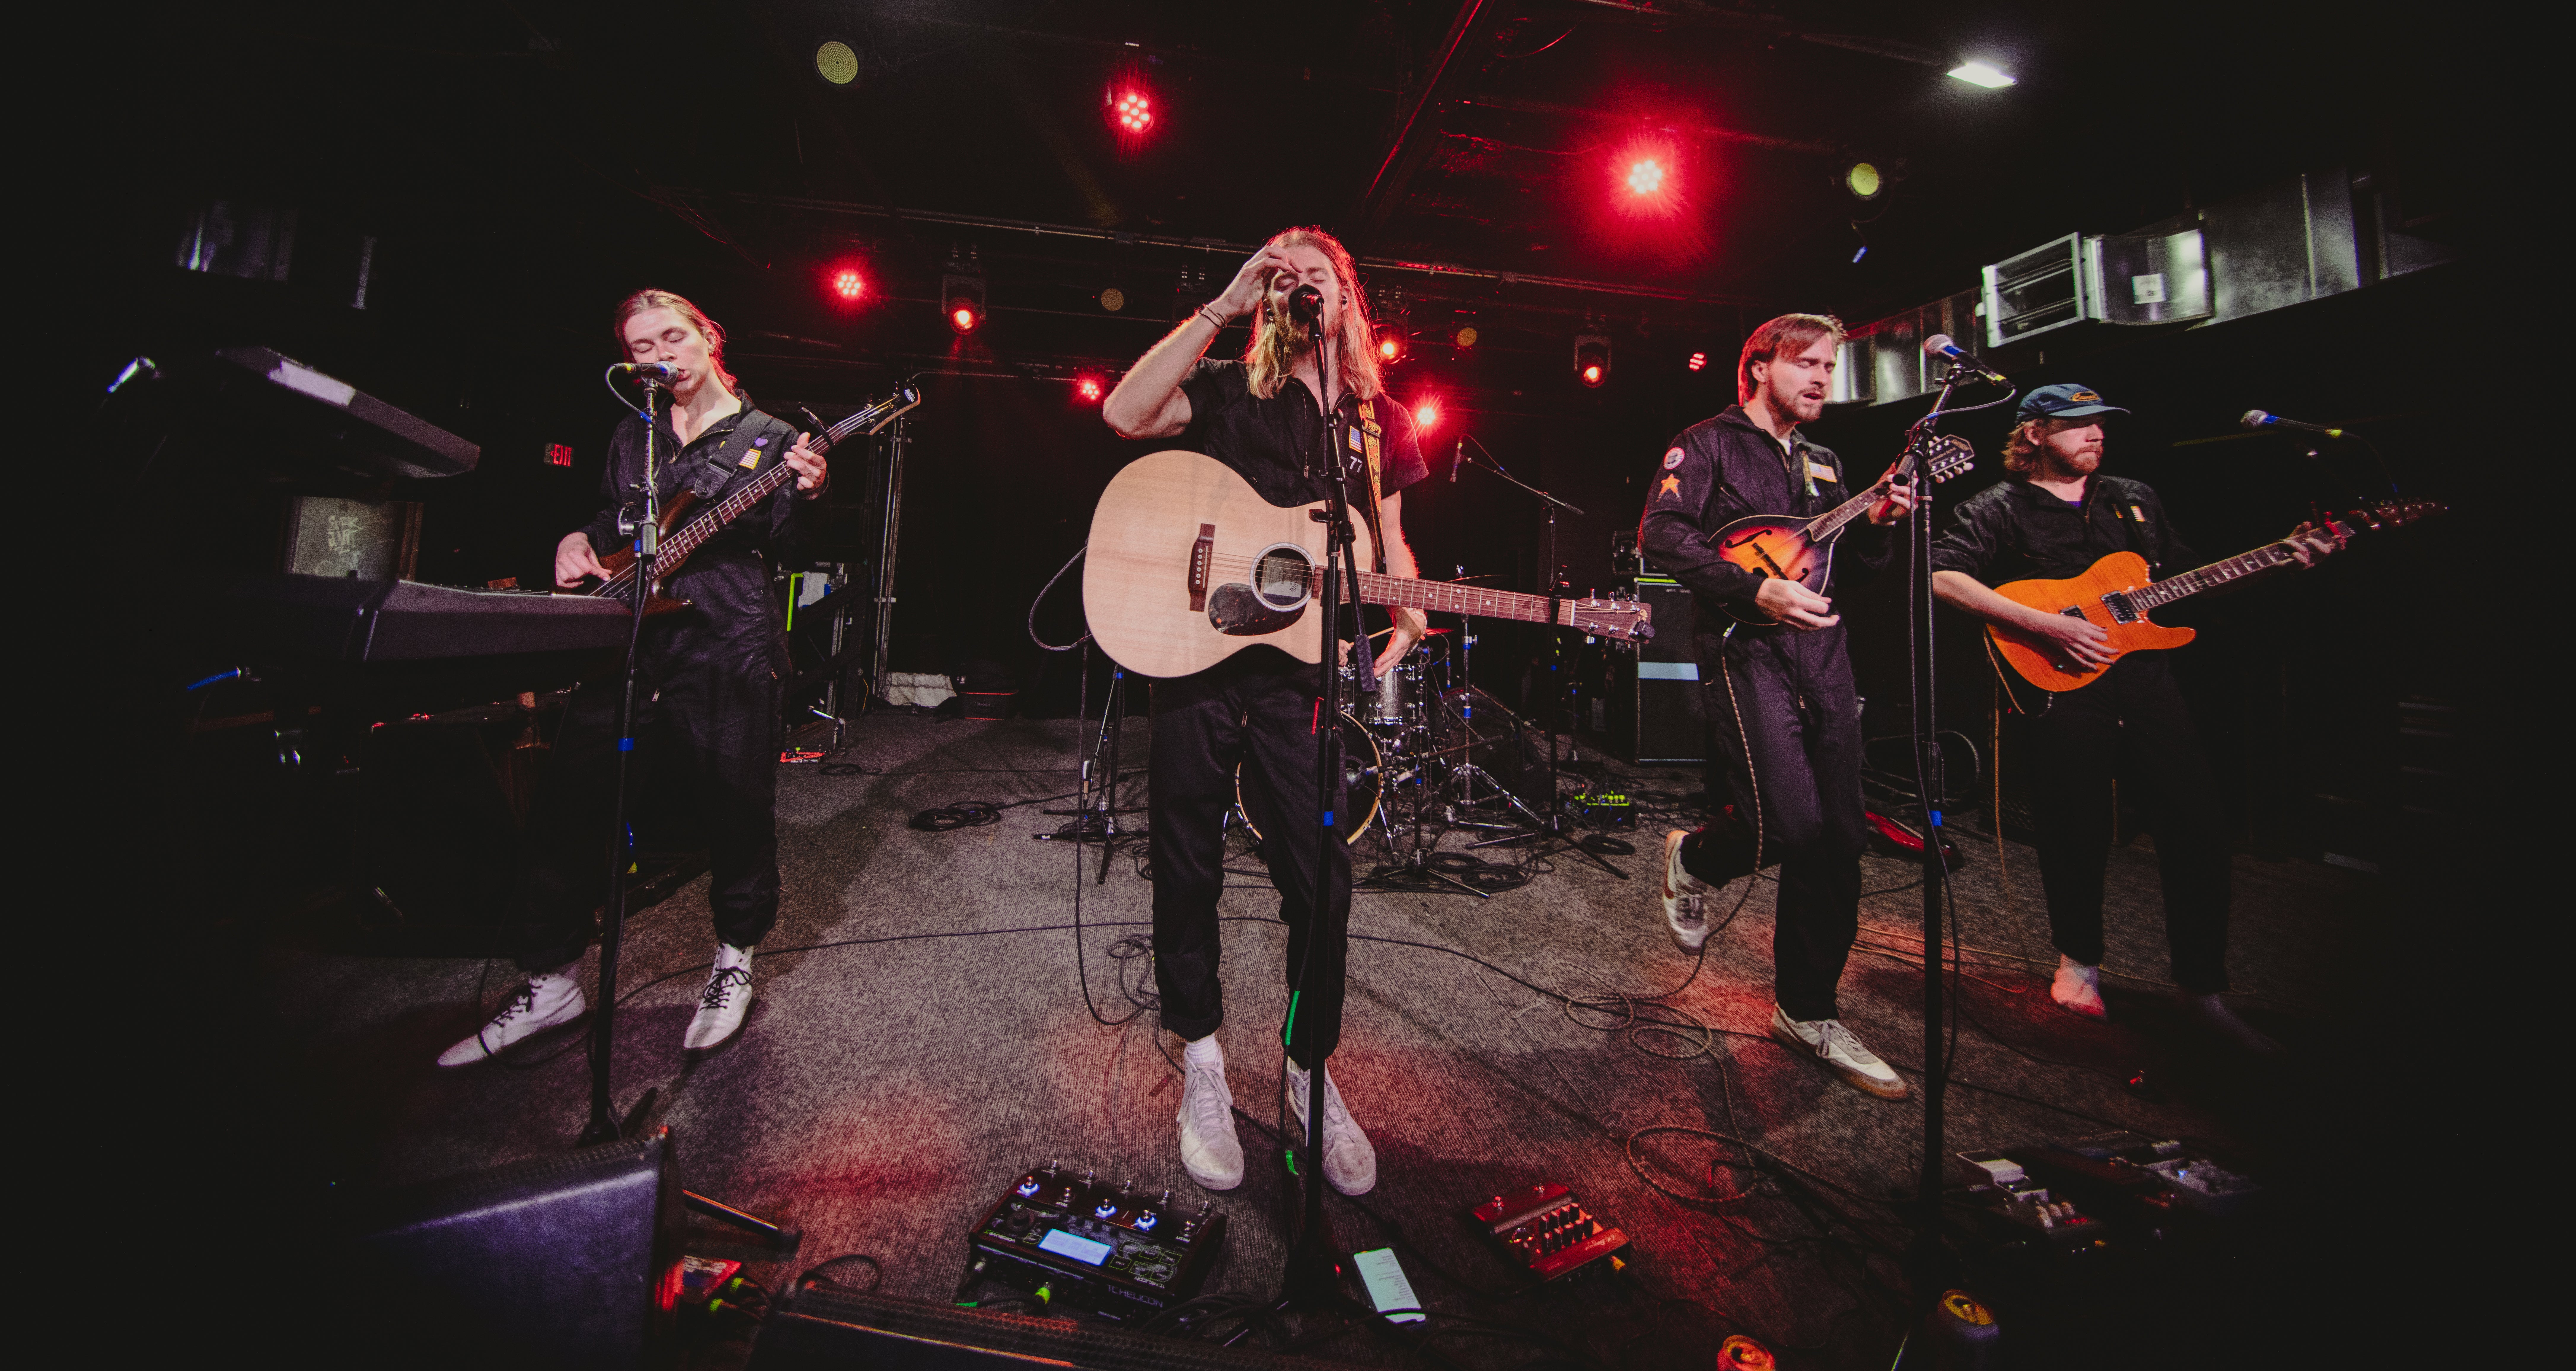 Homegrown: Happy Landing band finds their rhythm on the road